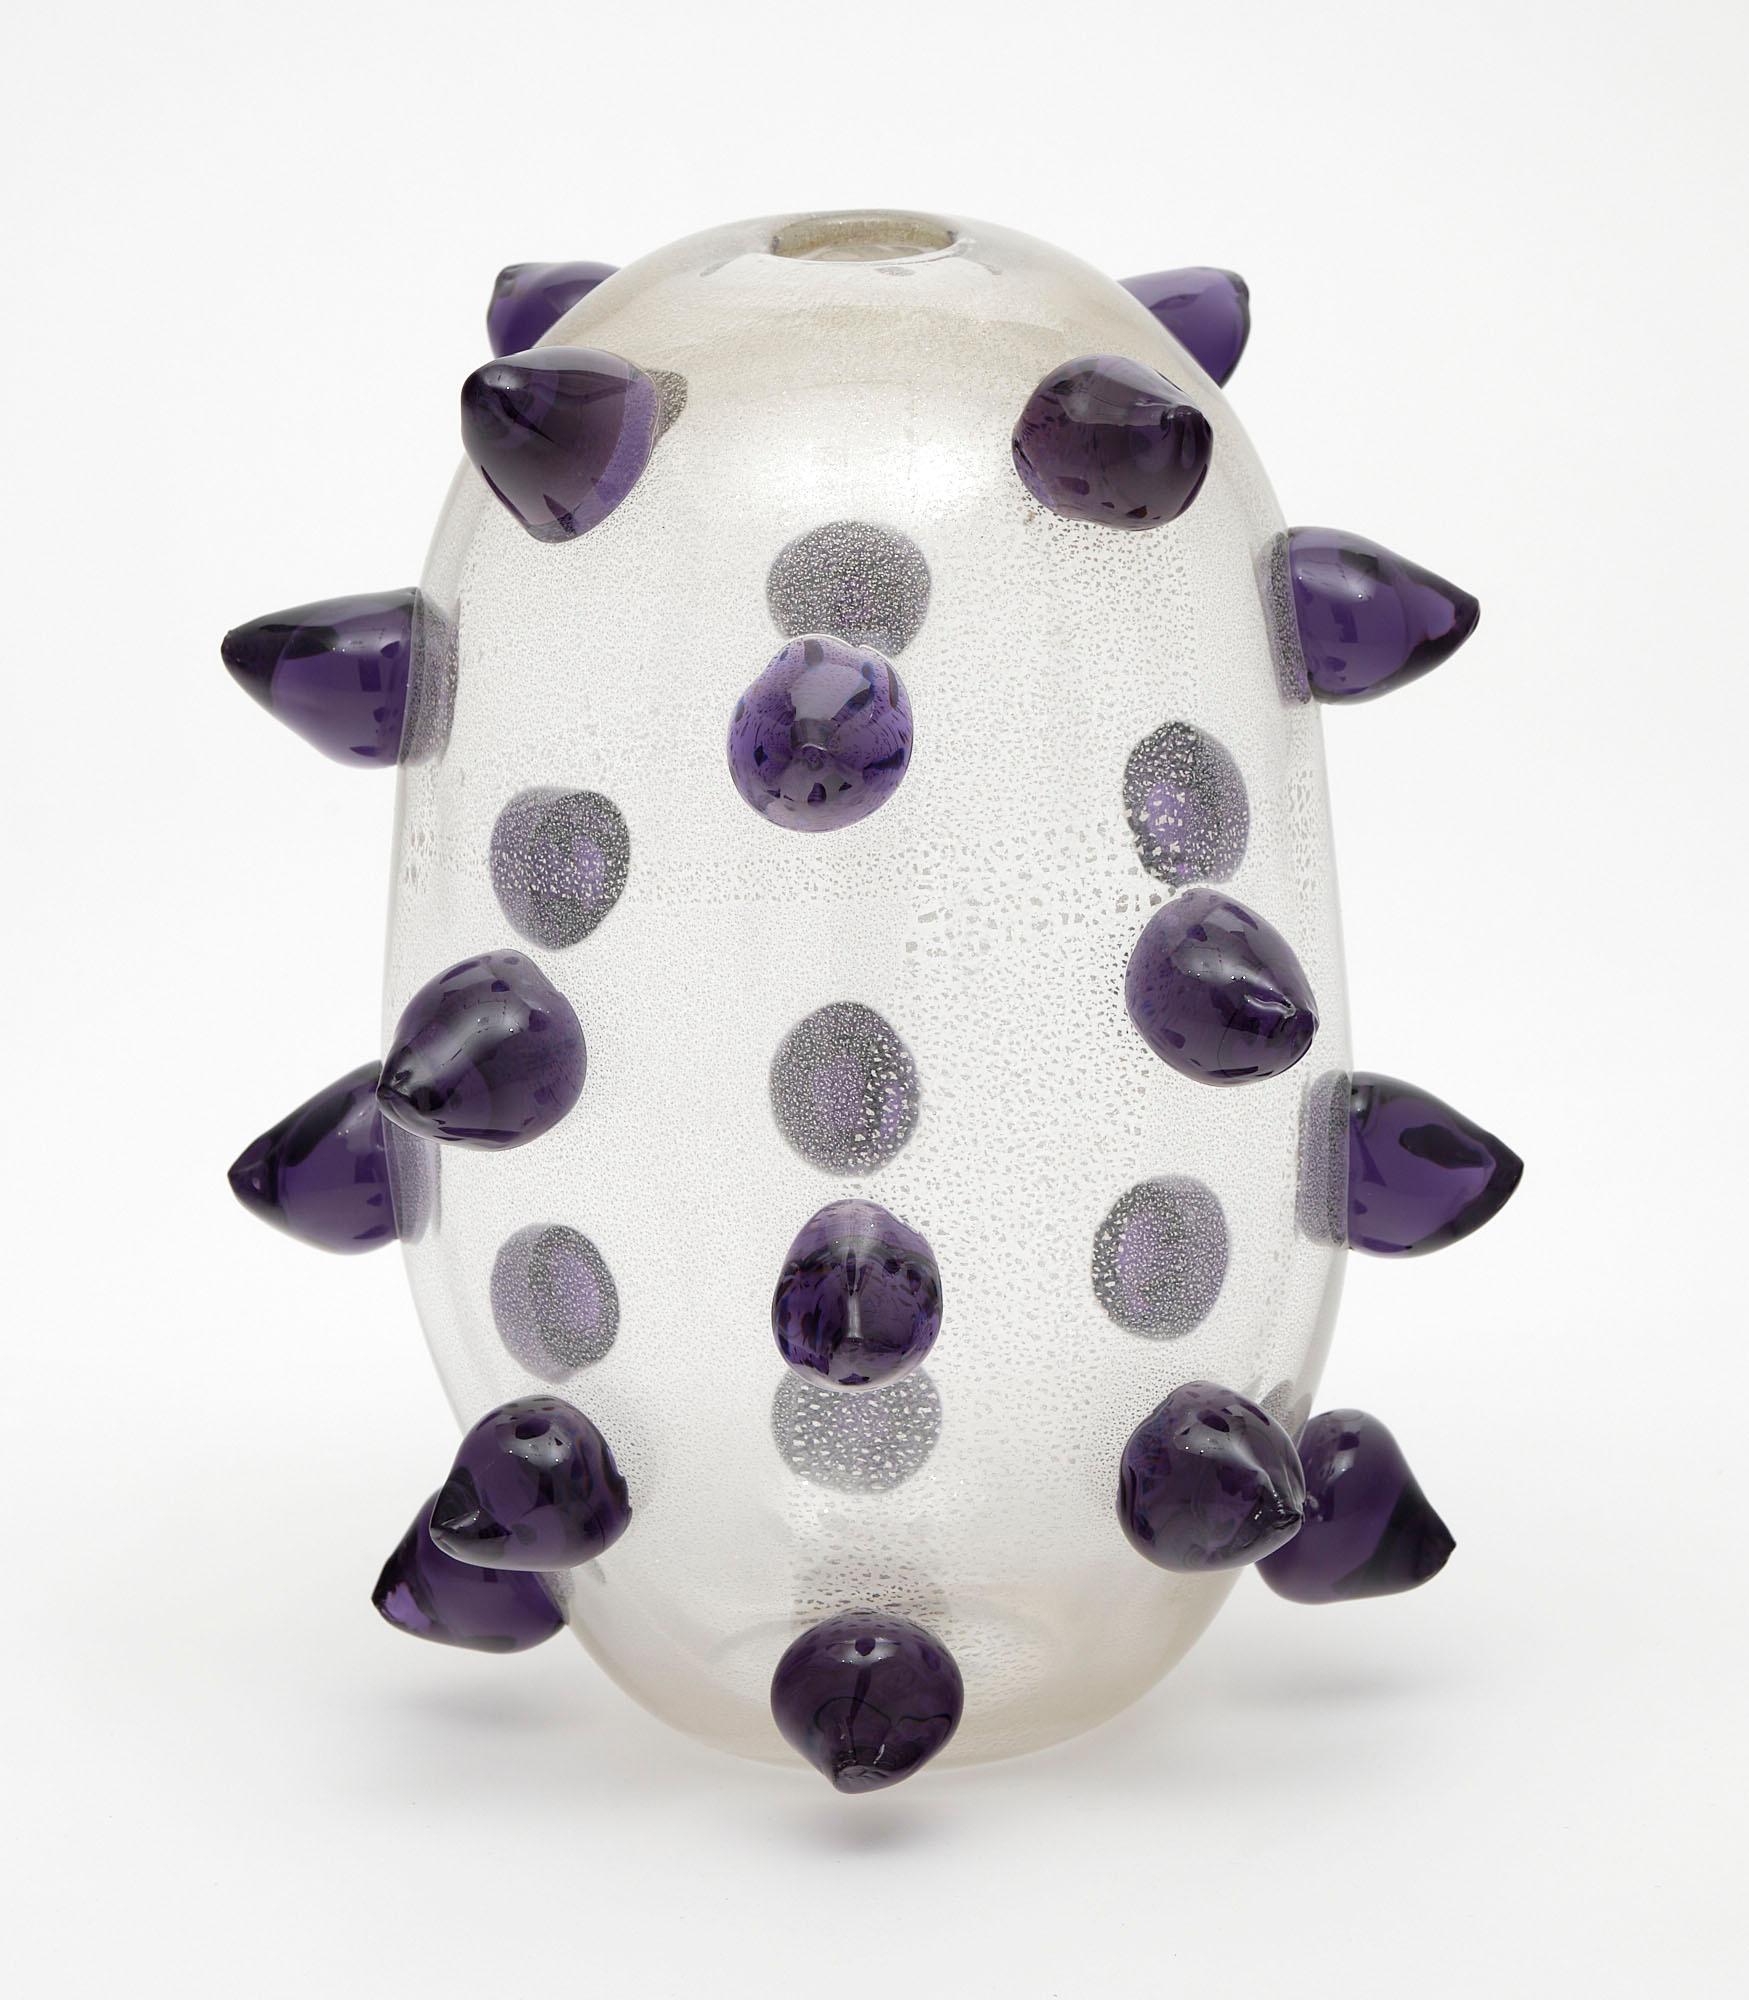 Vase of oval clear glass from the island of Murano featuring “beaks” (rostrate) of purple glass. We love this hand-blown unique piece.